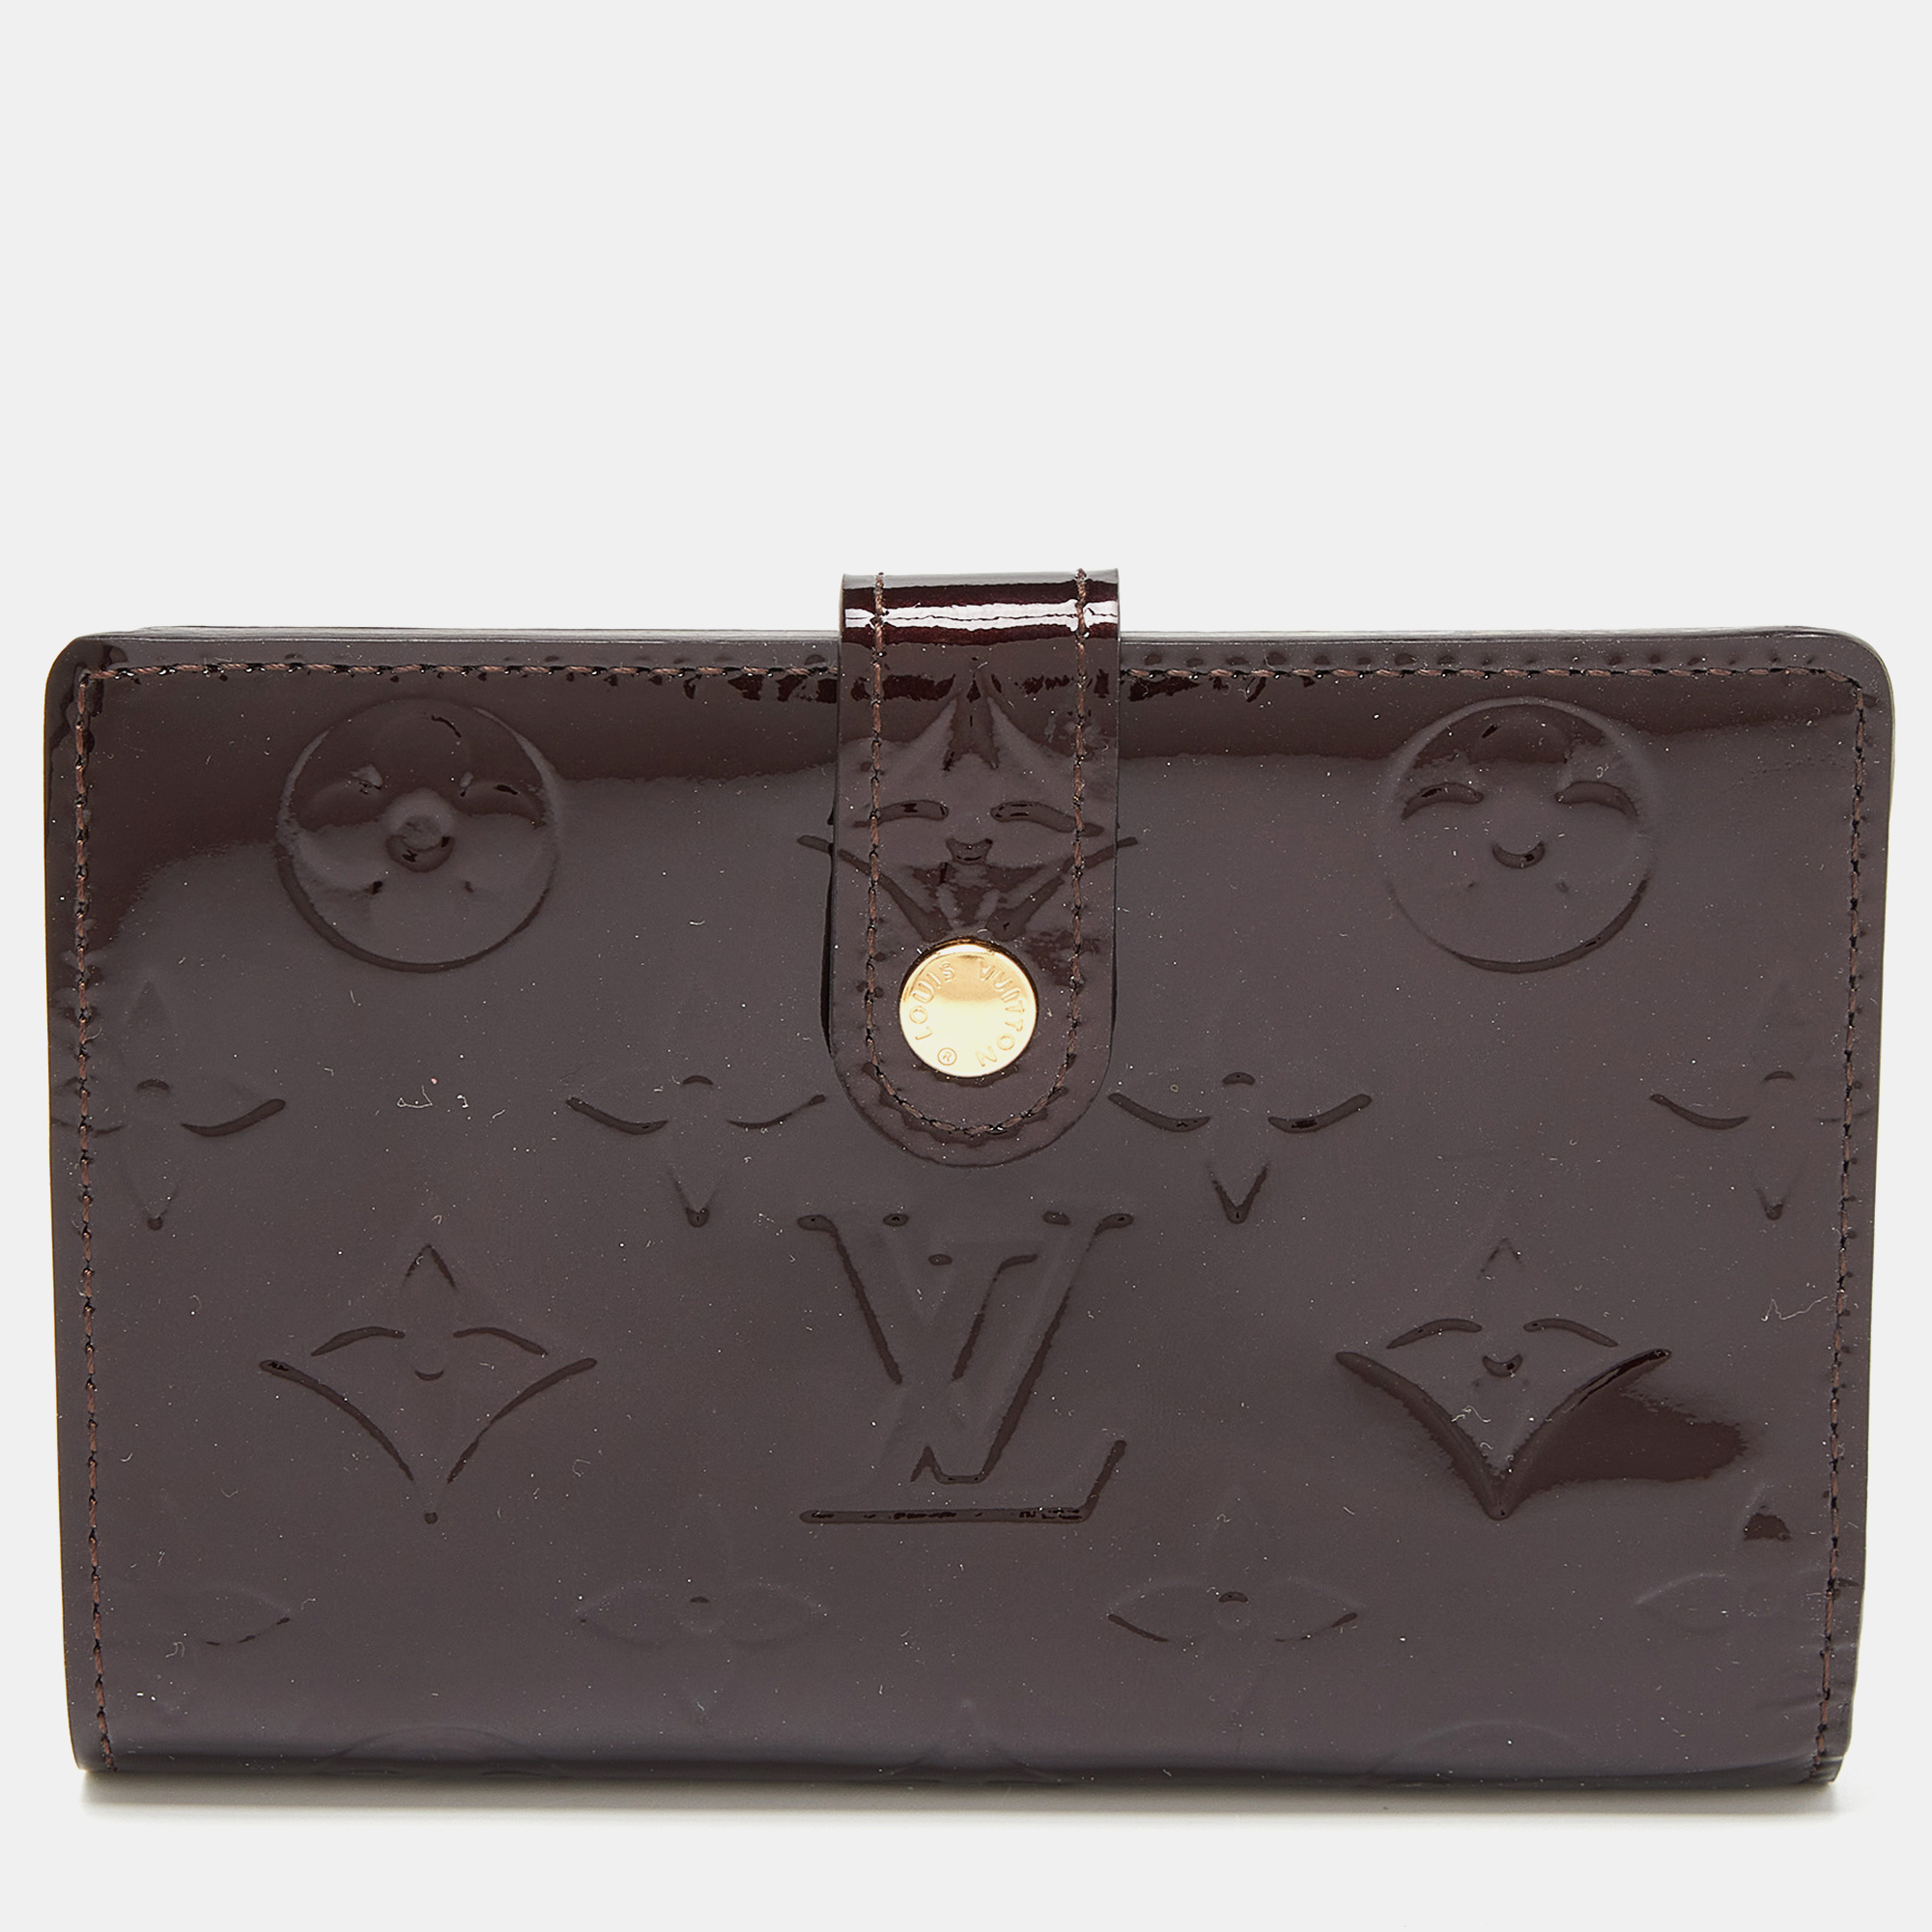 Louis Vuitton Vernis French Wallet Review and Comparison with the